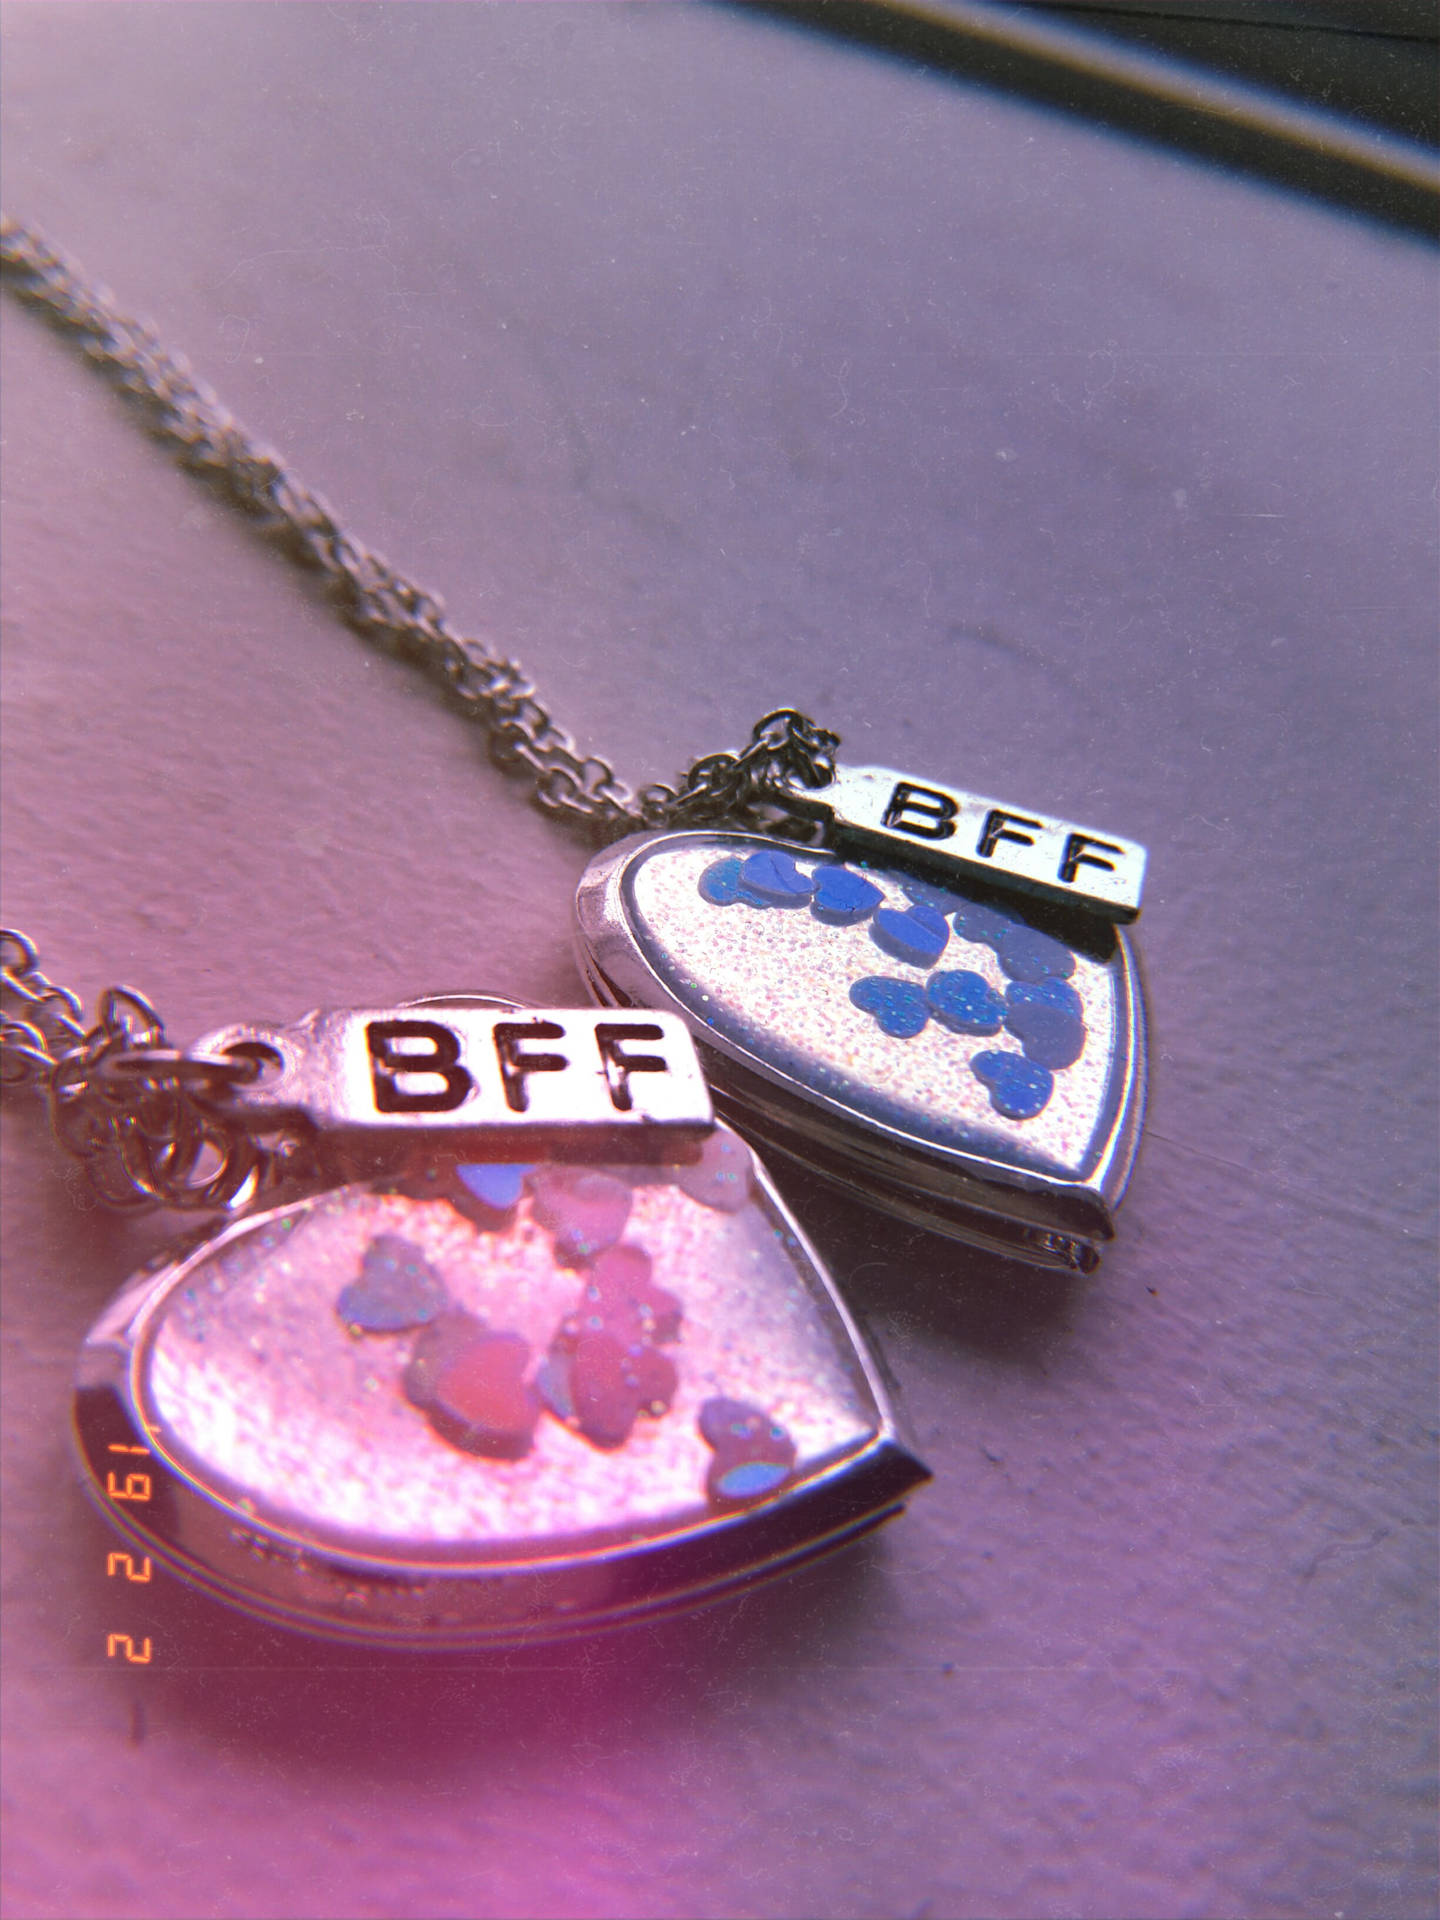 Girly Bff Locket Necklaces Wallpaper